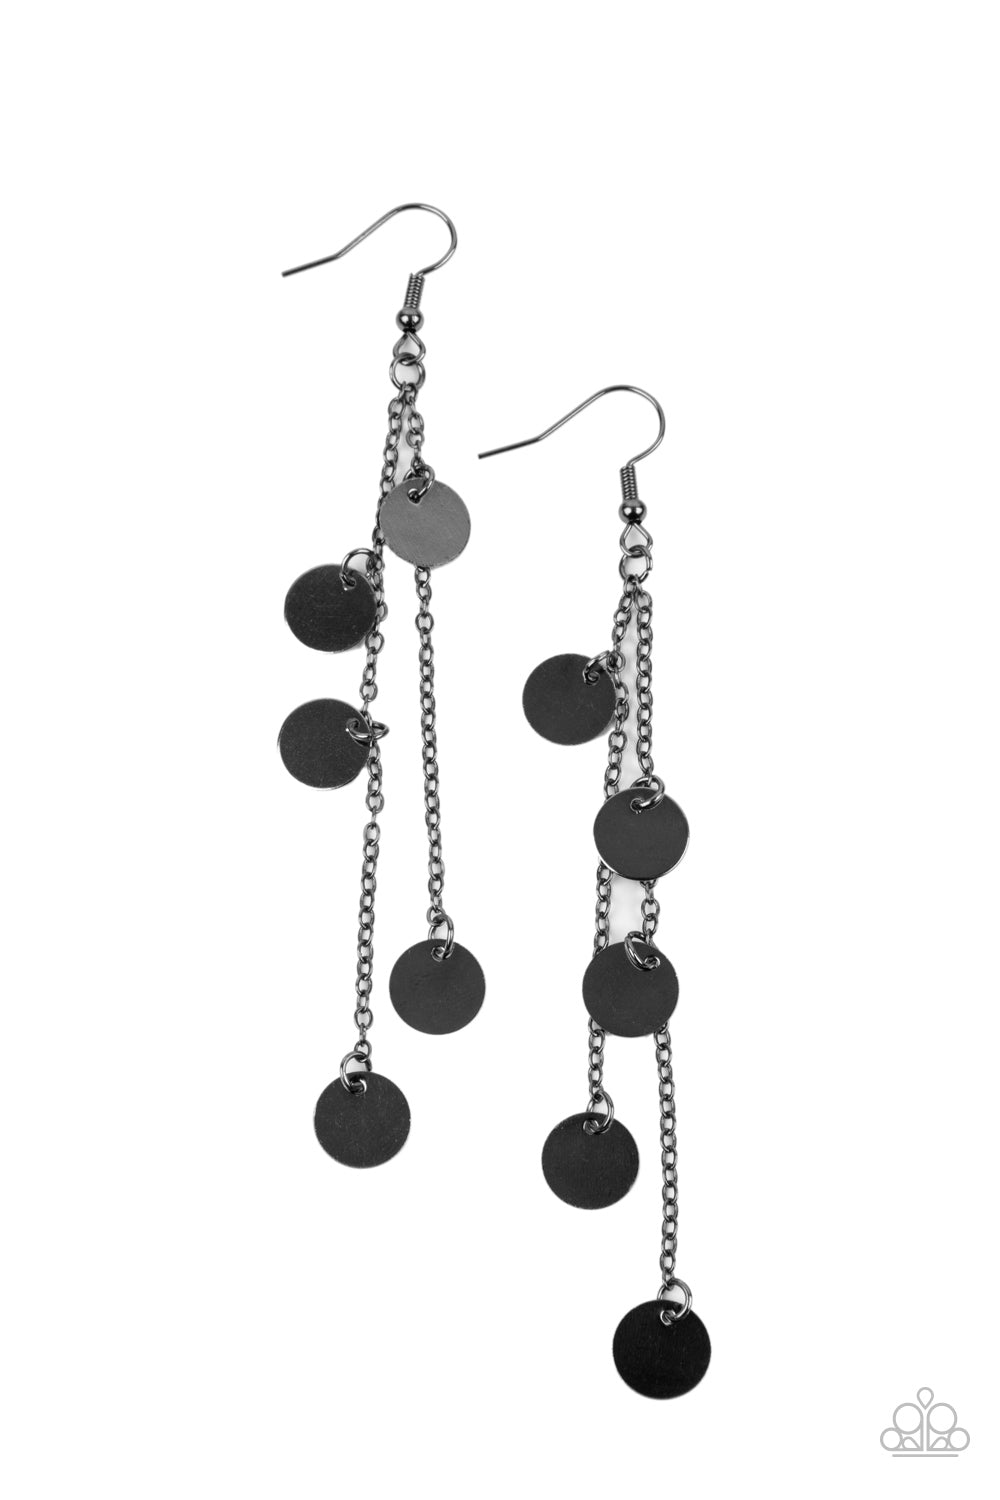 paparazzi-accessories-take-a-good-look-black-earrings